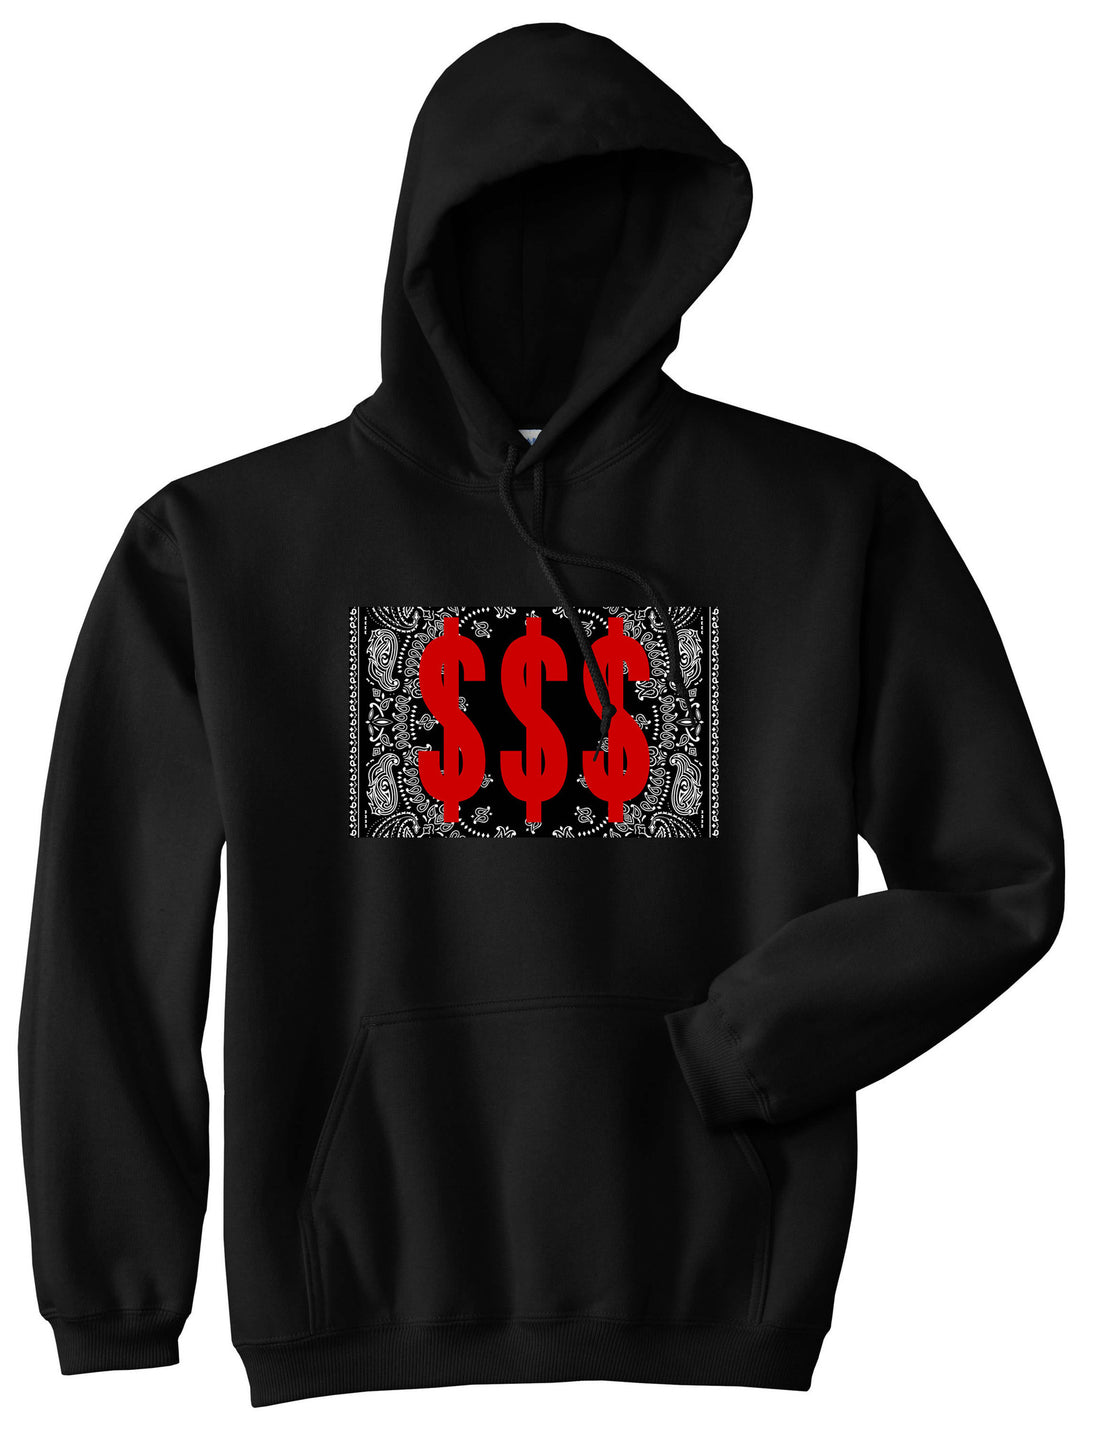 Money Bandana Gang Pullover Hoodie in Black By Kings Of NY